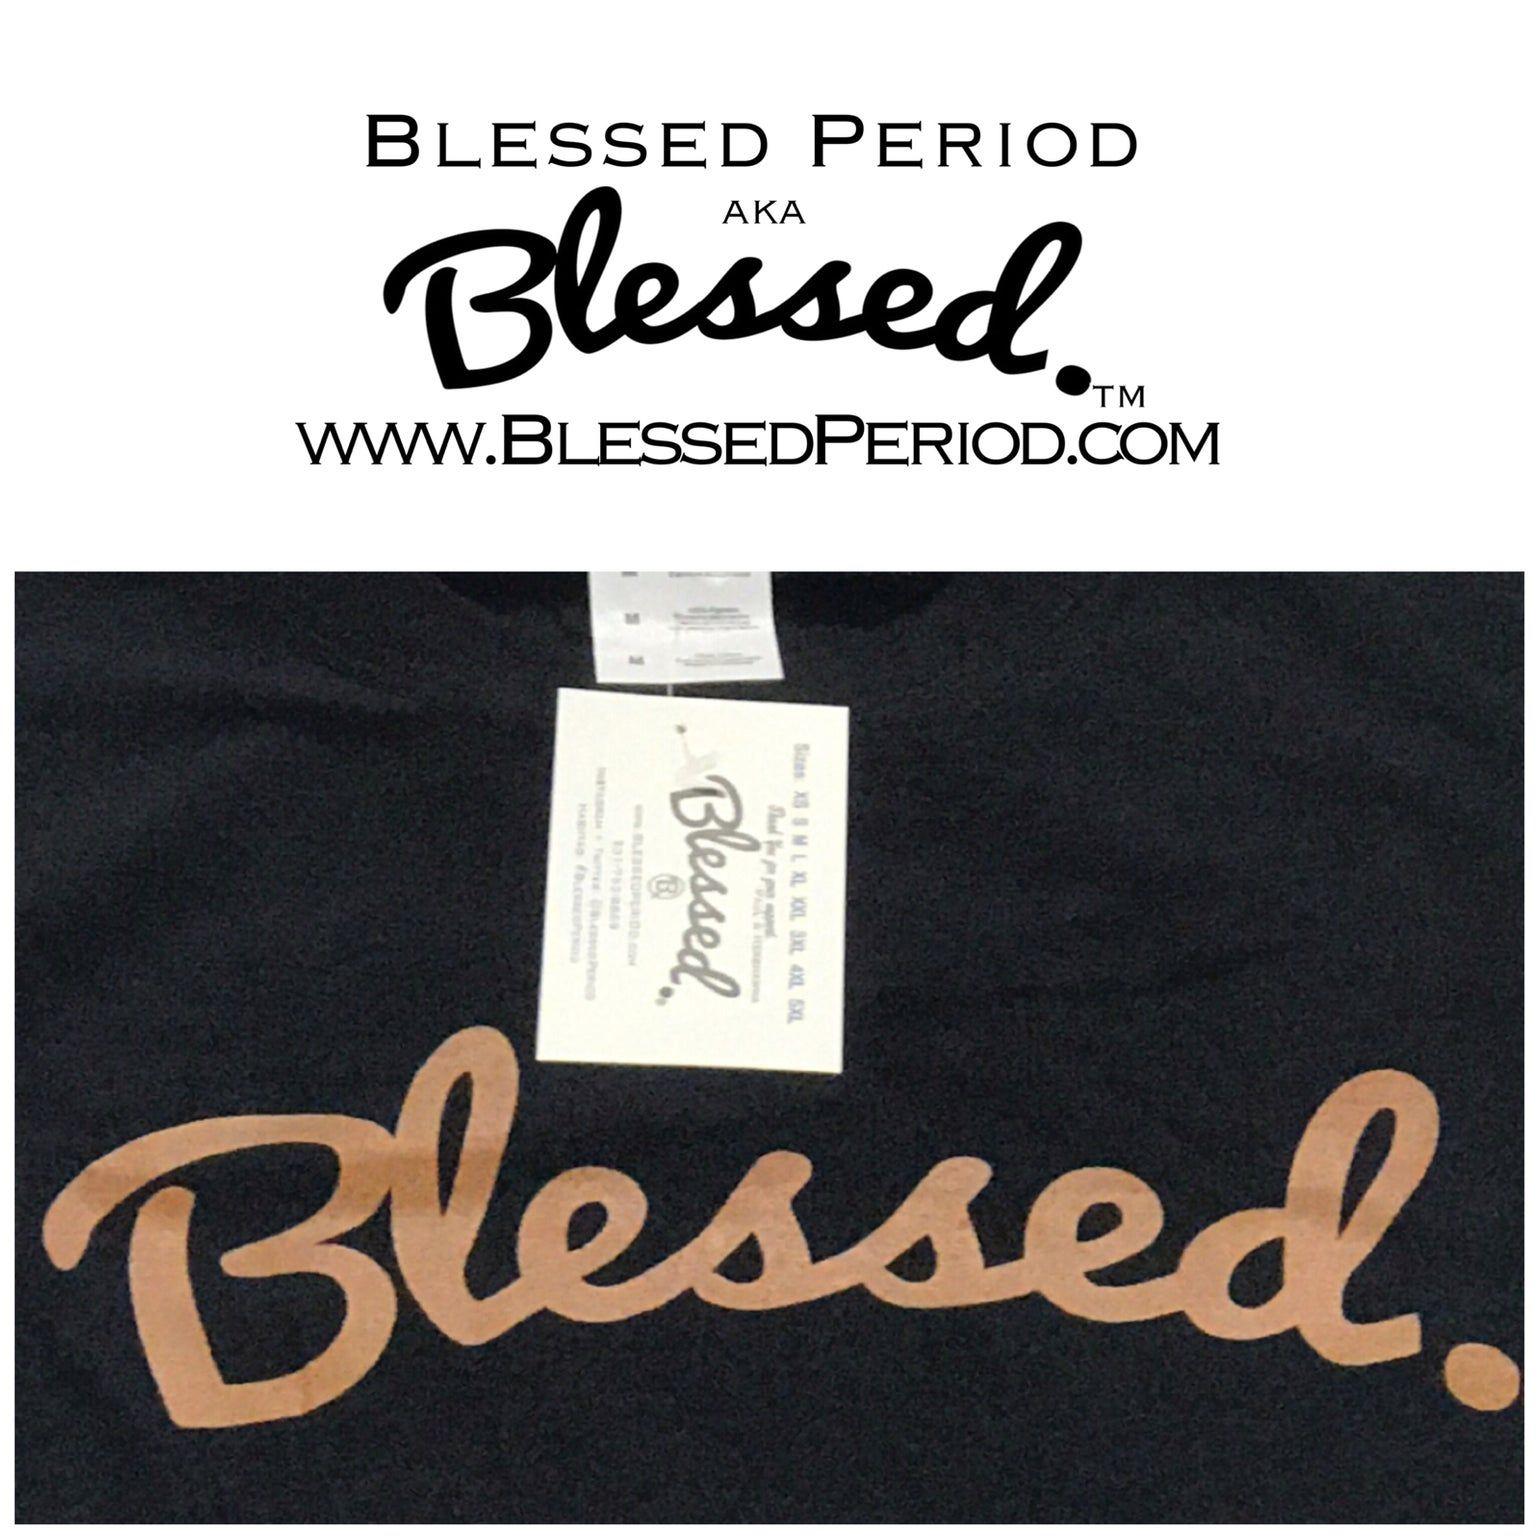 Blessed Logo - Metallic Copper Blessed Period aka “Blessed.” Logo T